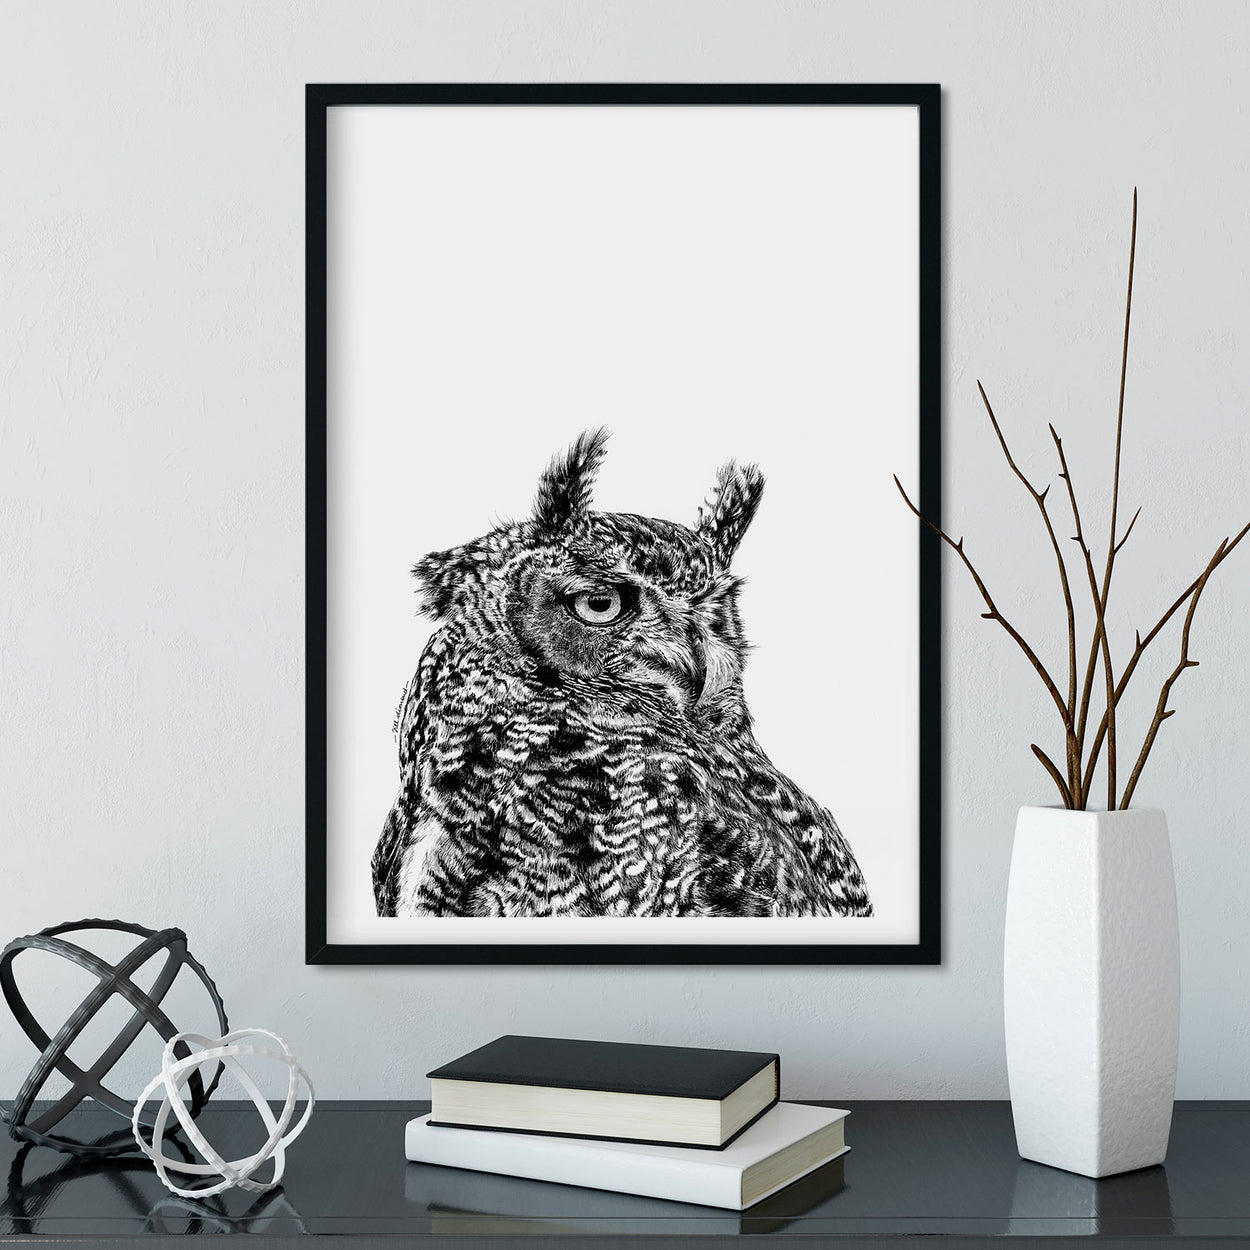 Eagle Owl Wall Art Framed - The Thriving Wild